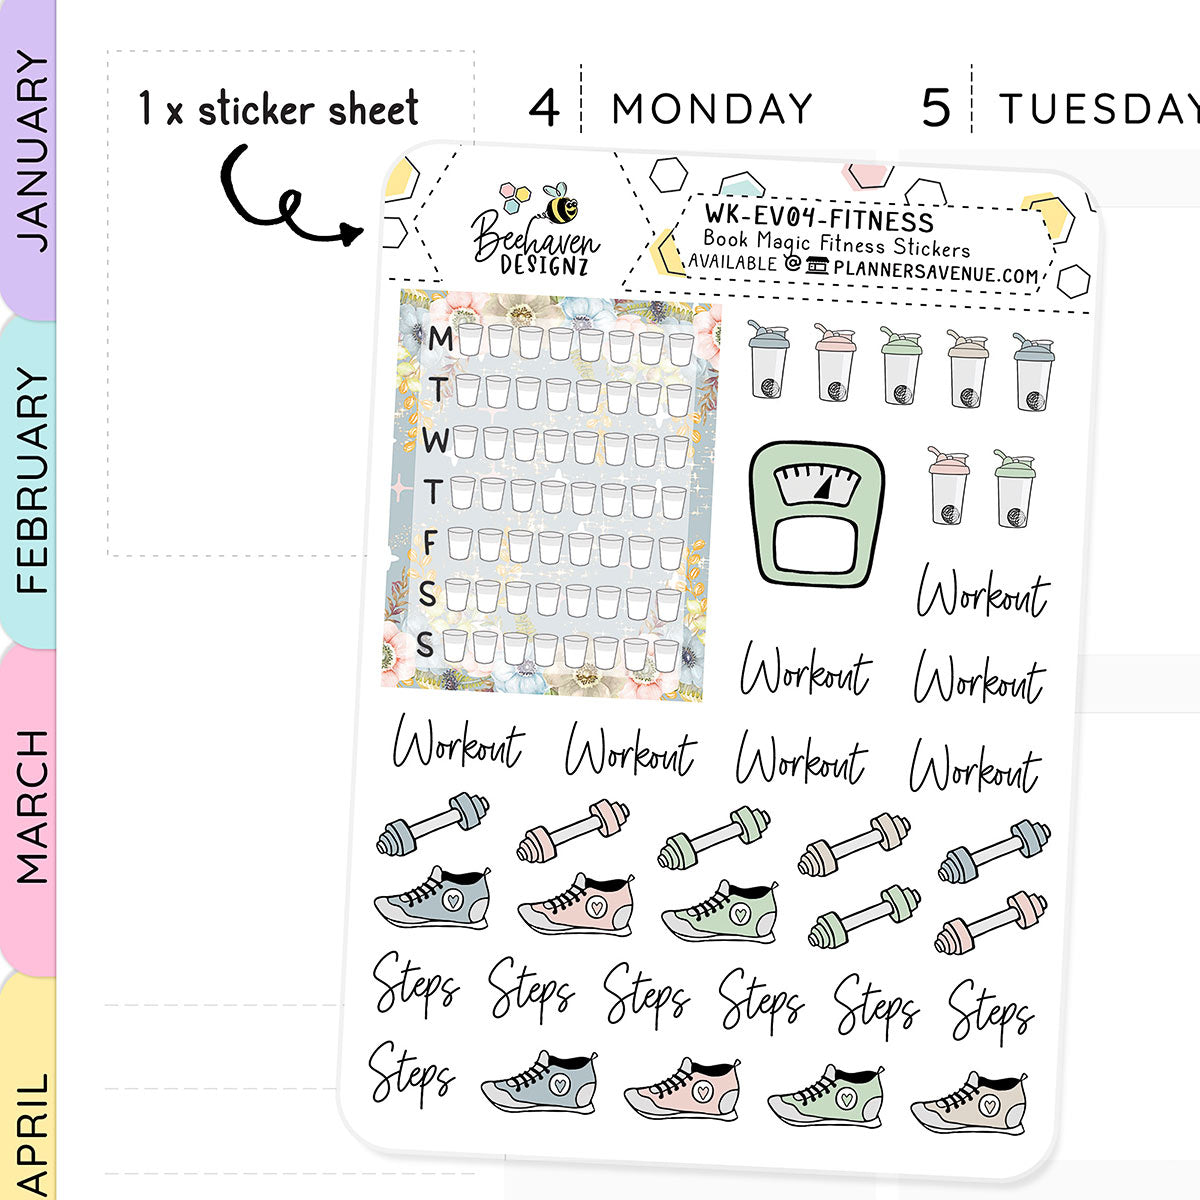 Book Magic Fitness Planner Stickers